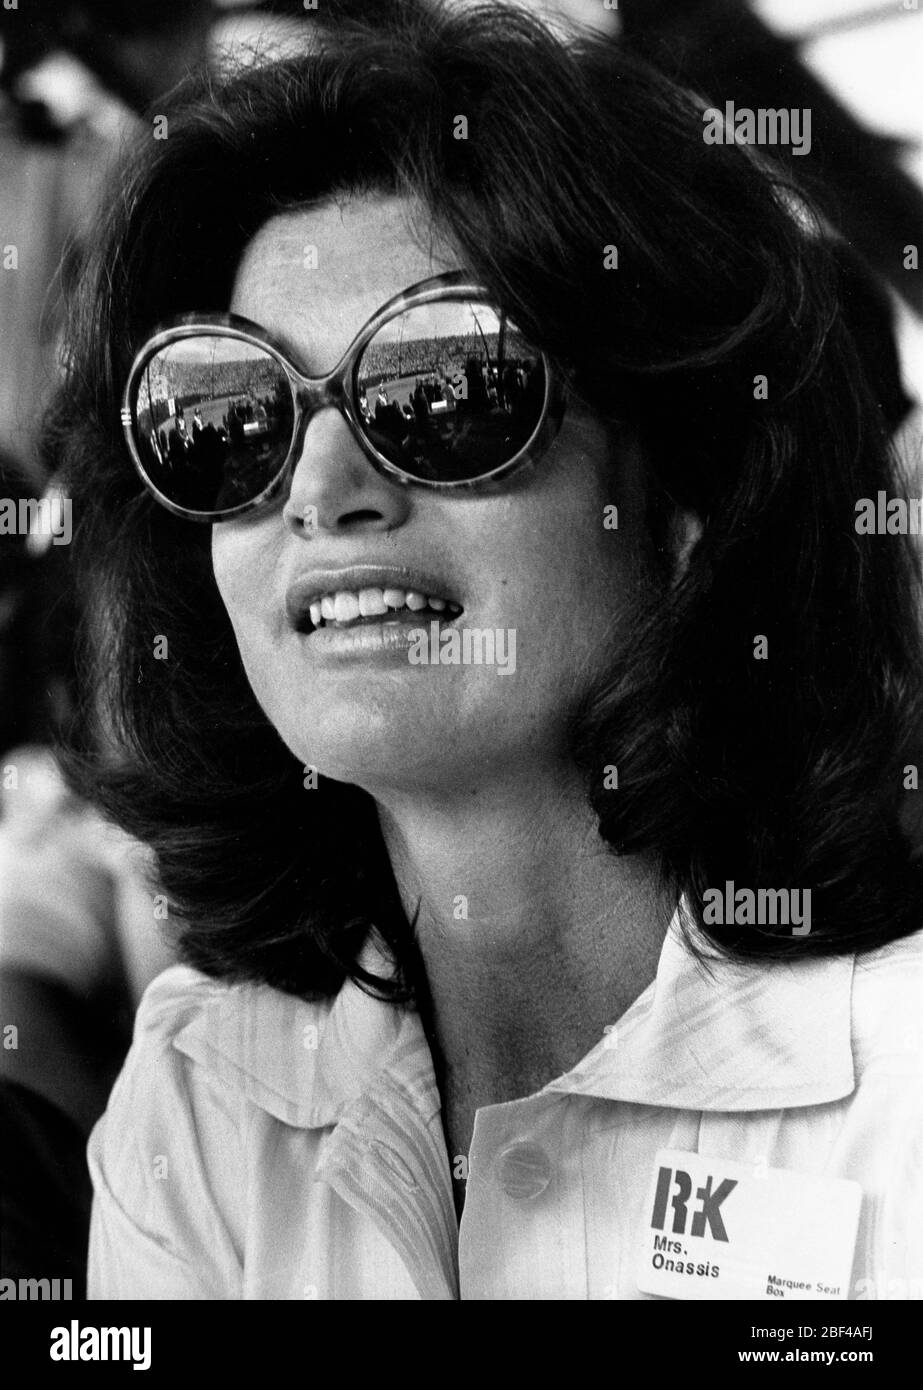 Wife of the french president Black and White Stock Photos & Images - Alamy